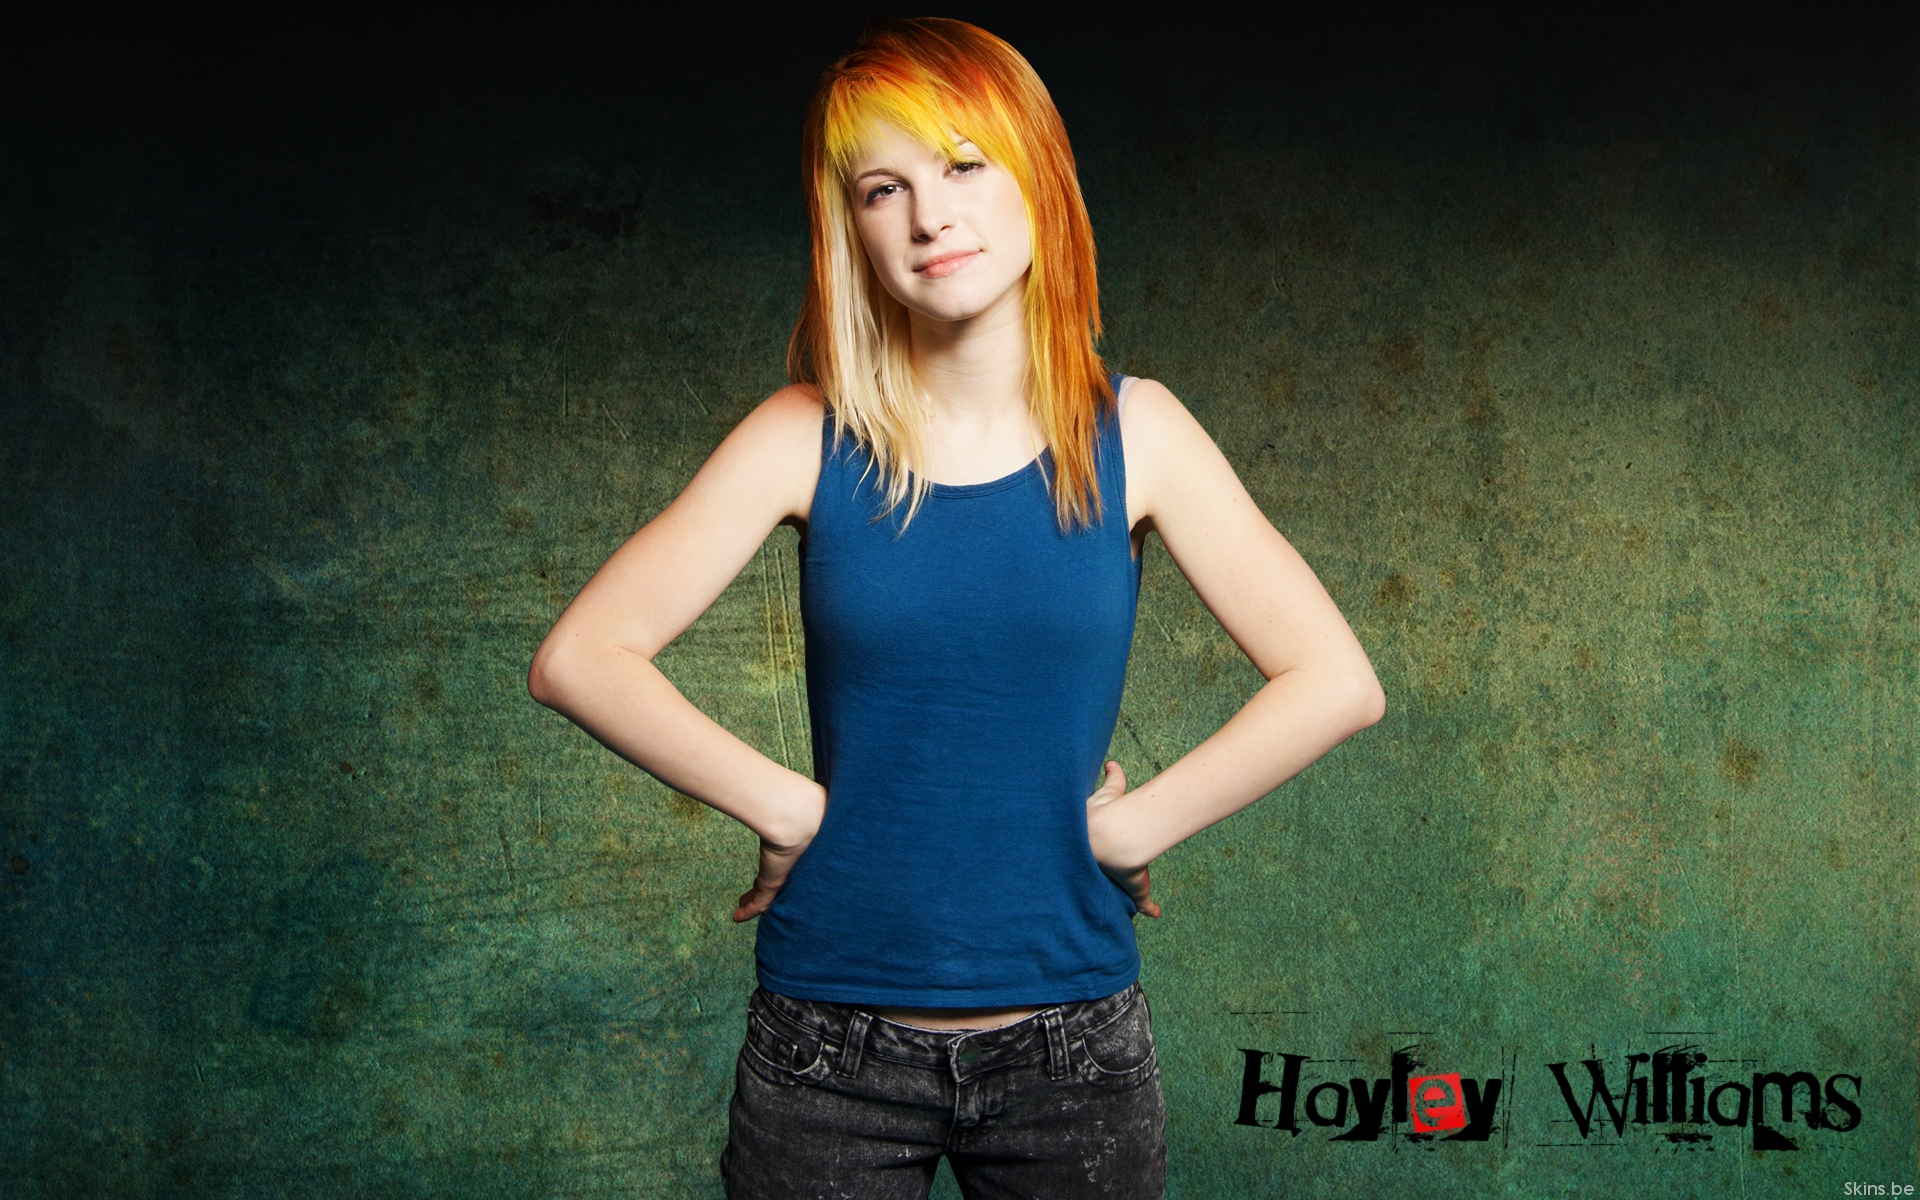 Hayley Williams Of Paramore Female Lead Singers Wallpaper